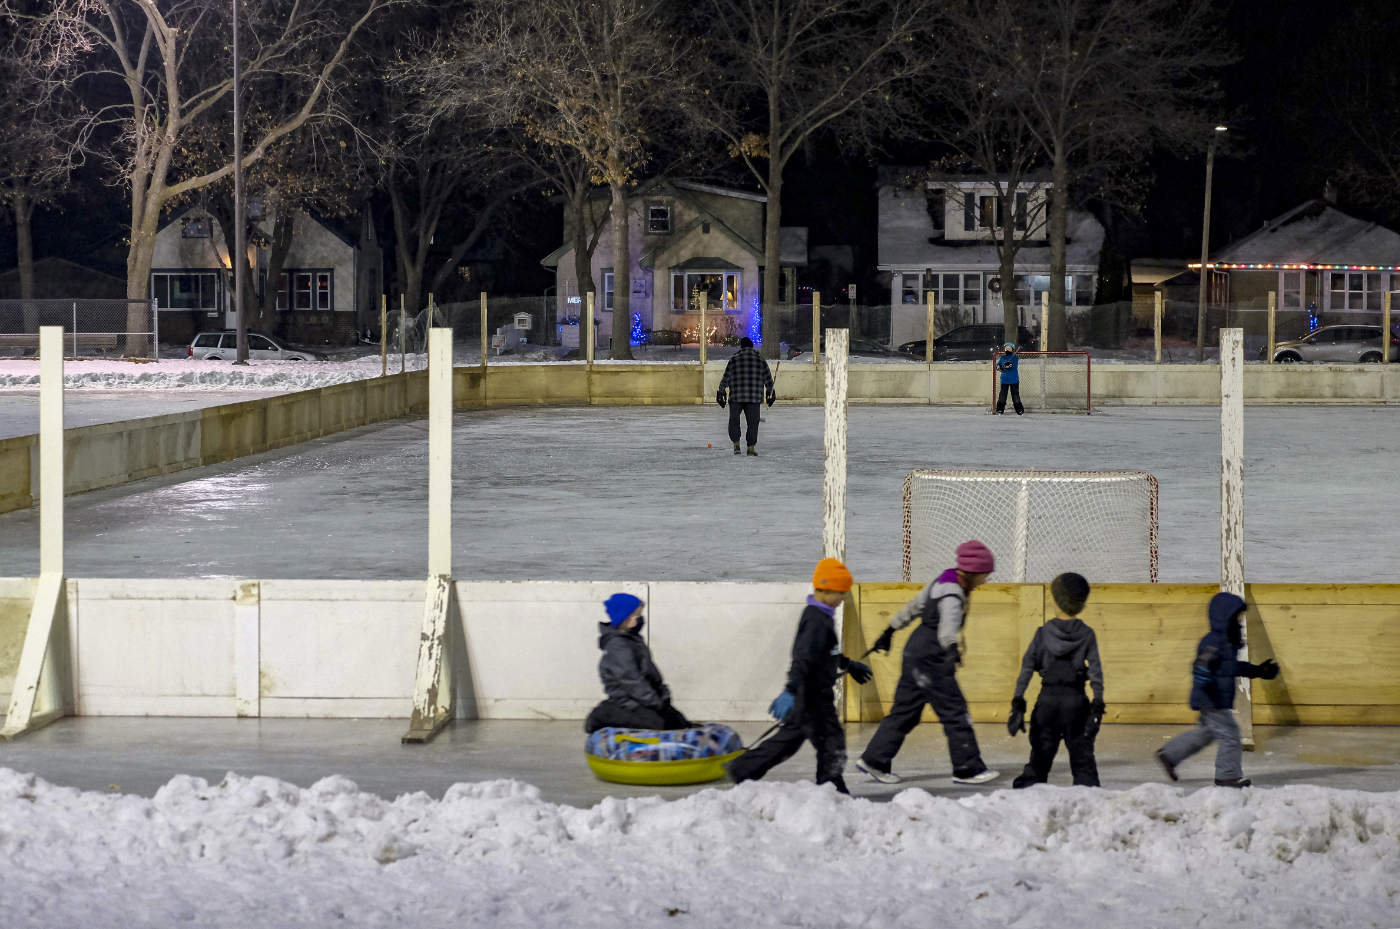 outdoor hockey rink at night with a group of children pulling one sitting on a inflated sliding tube